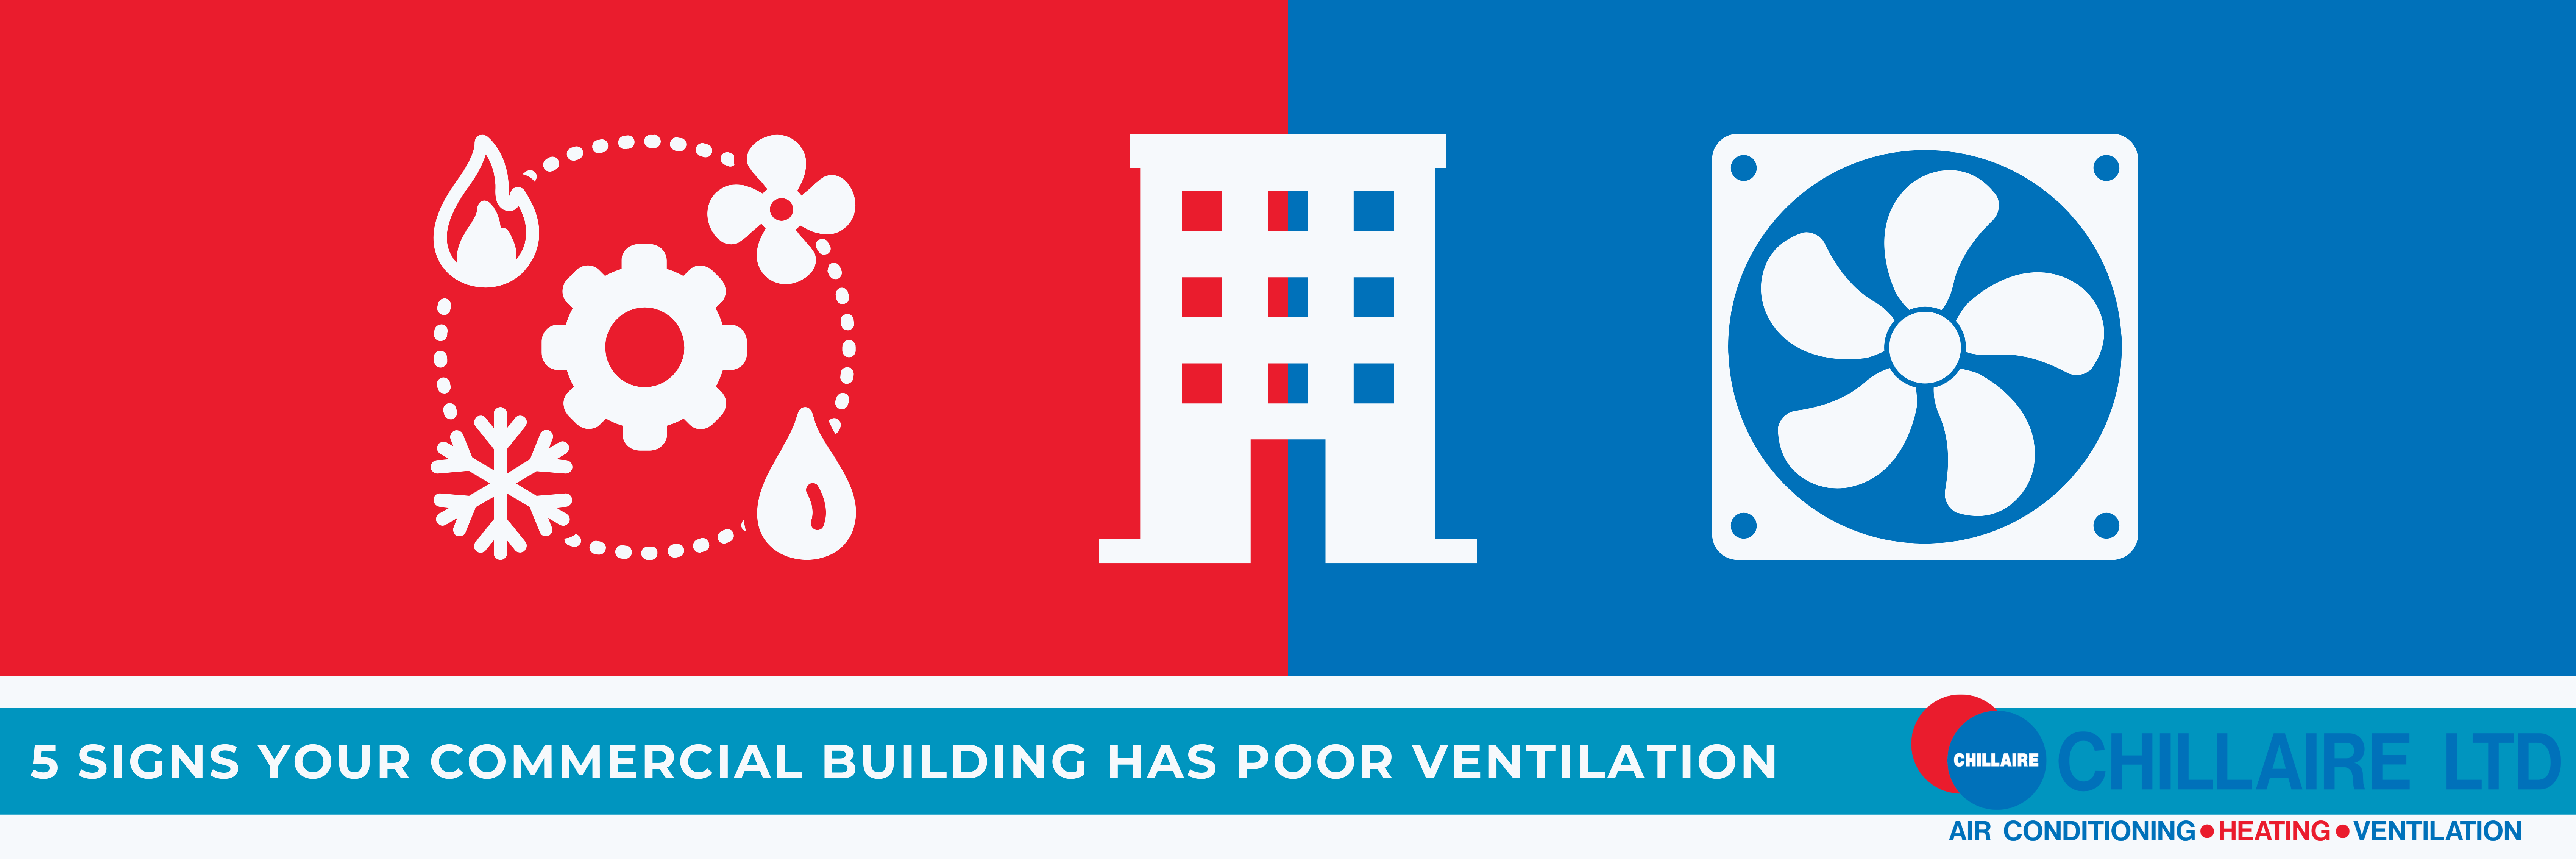 5-signs-your-commercial-building-has-poor-ventilation-chillaire